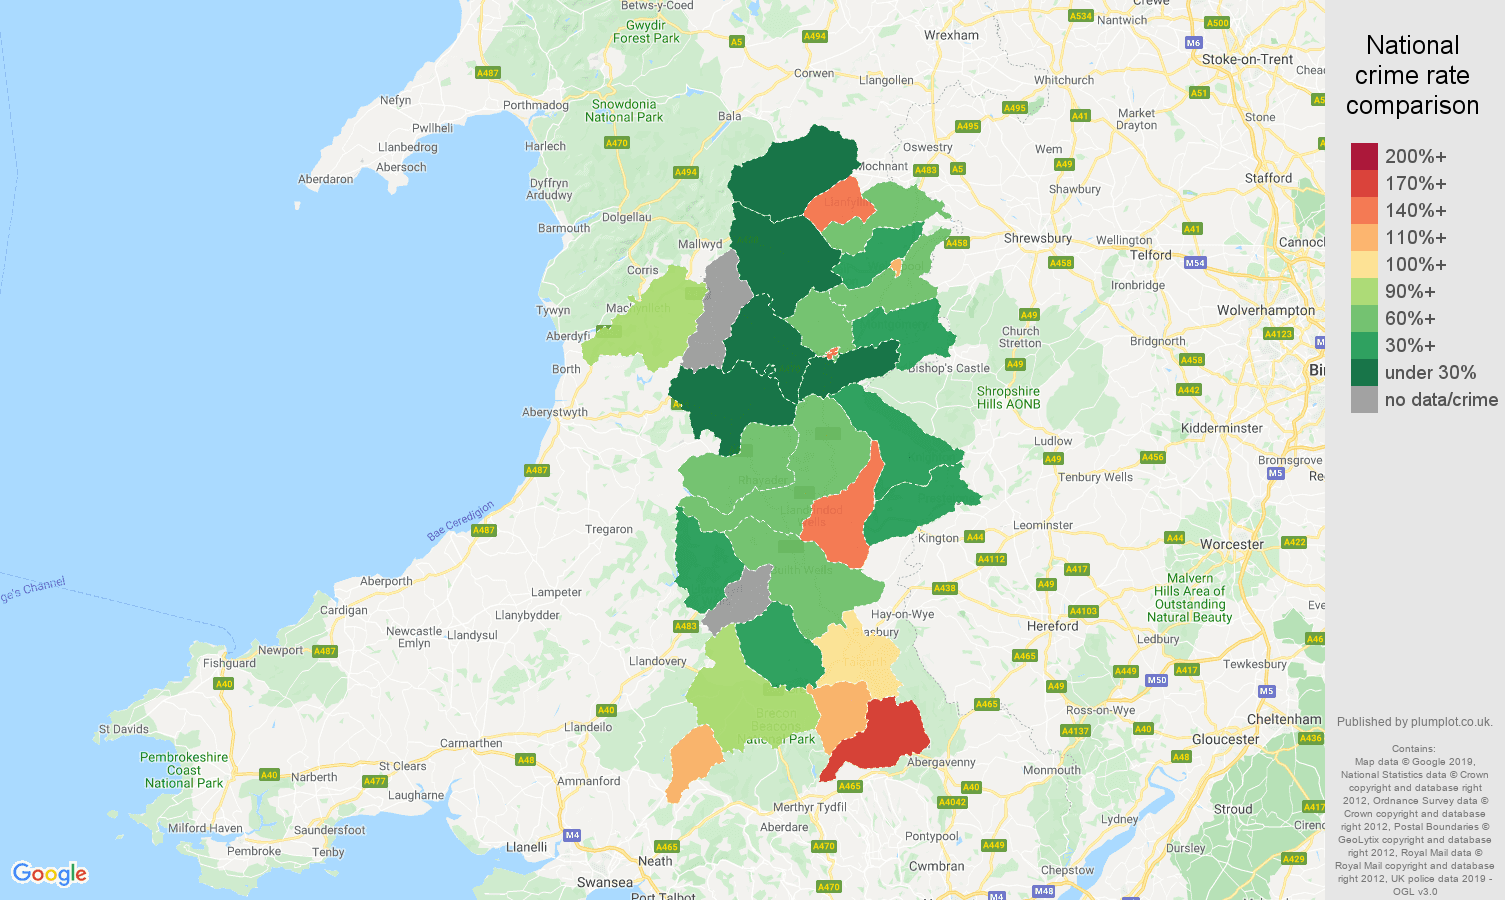 Powys other crime rate comparison map